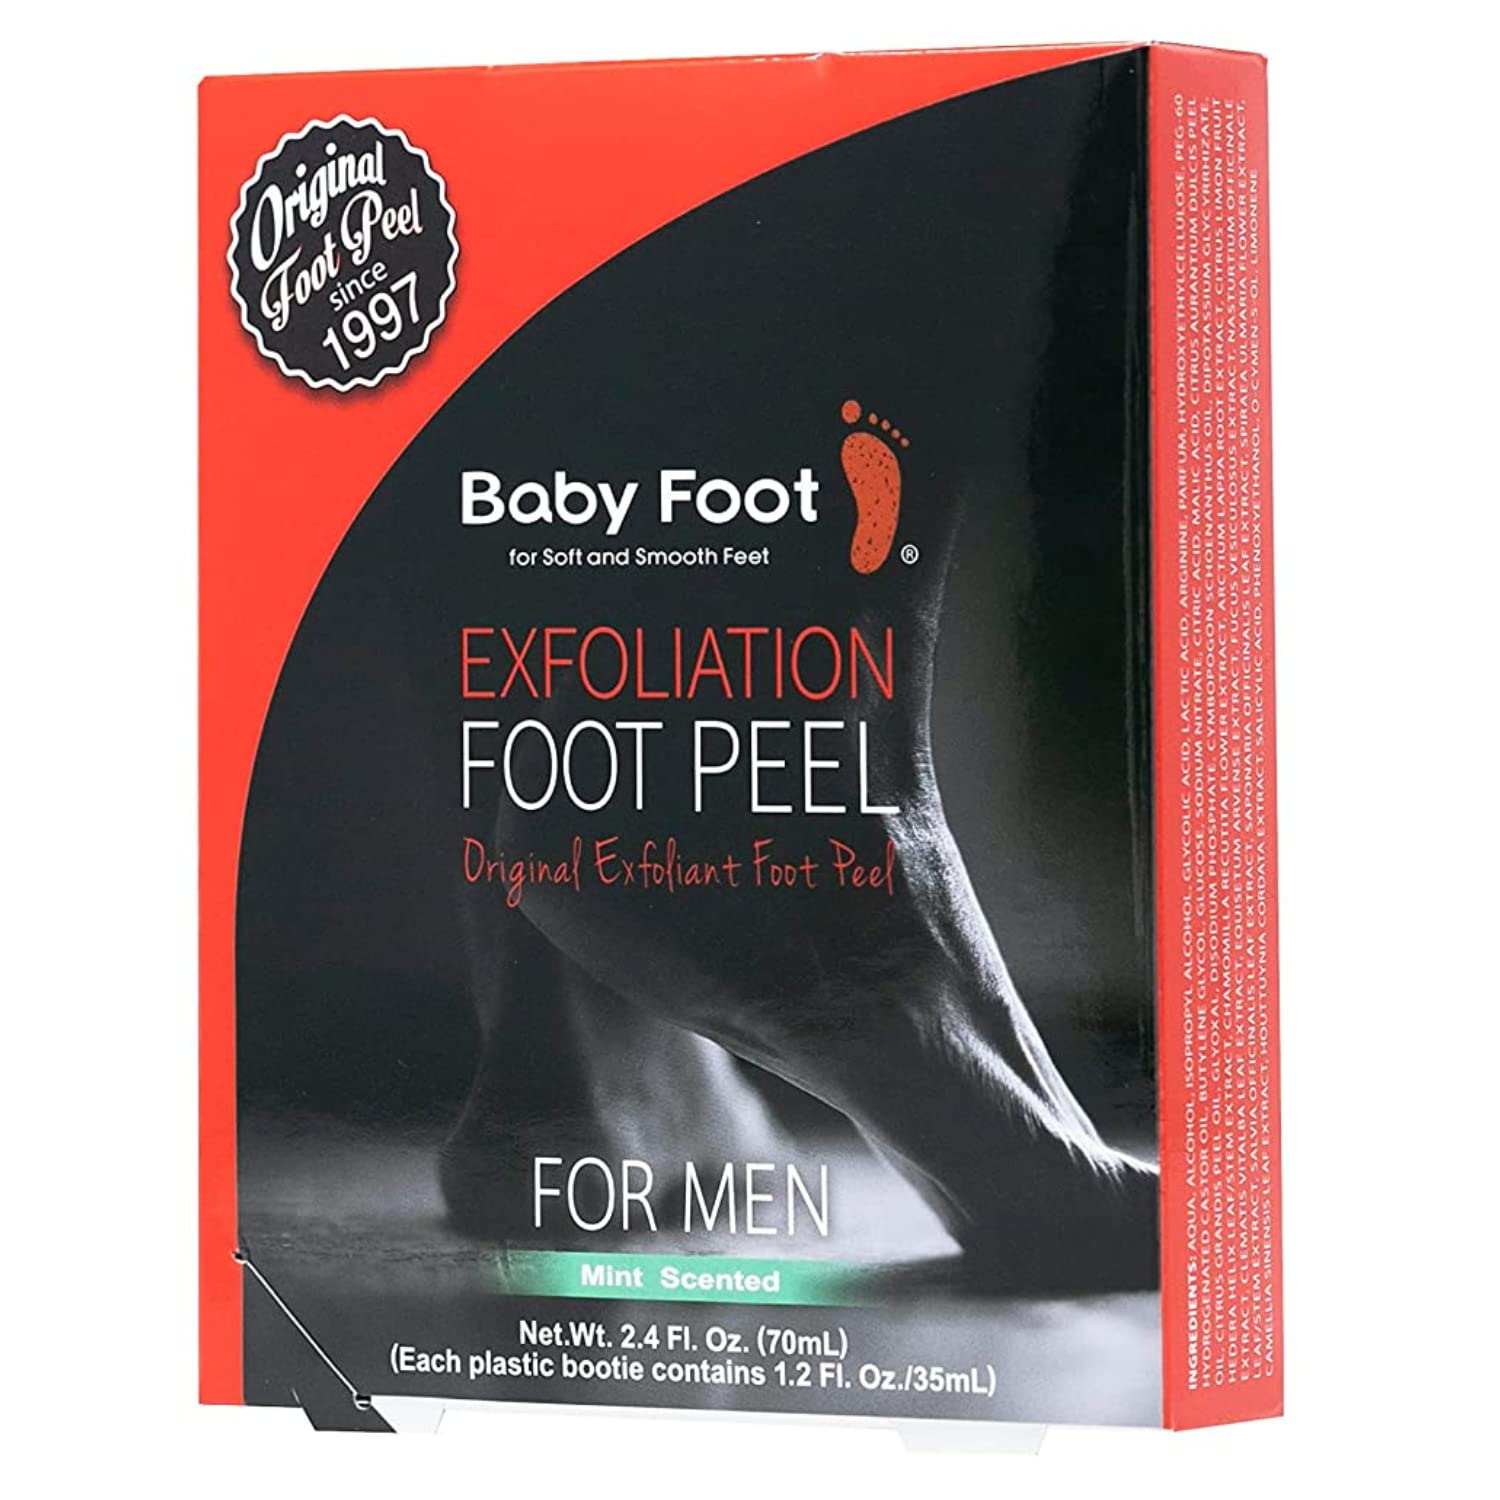 Baby Foot - Original Foot Peel Exfoliator For Men - Mint Scent Pair - Foot Peel Mask - Repair Rough Dry Cracked Feet and remove Dead Skin, Repair Heels and enjoy Baby Soft Smooth Feet 2.7 Fl. Oz. Mint Scented Pair